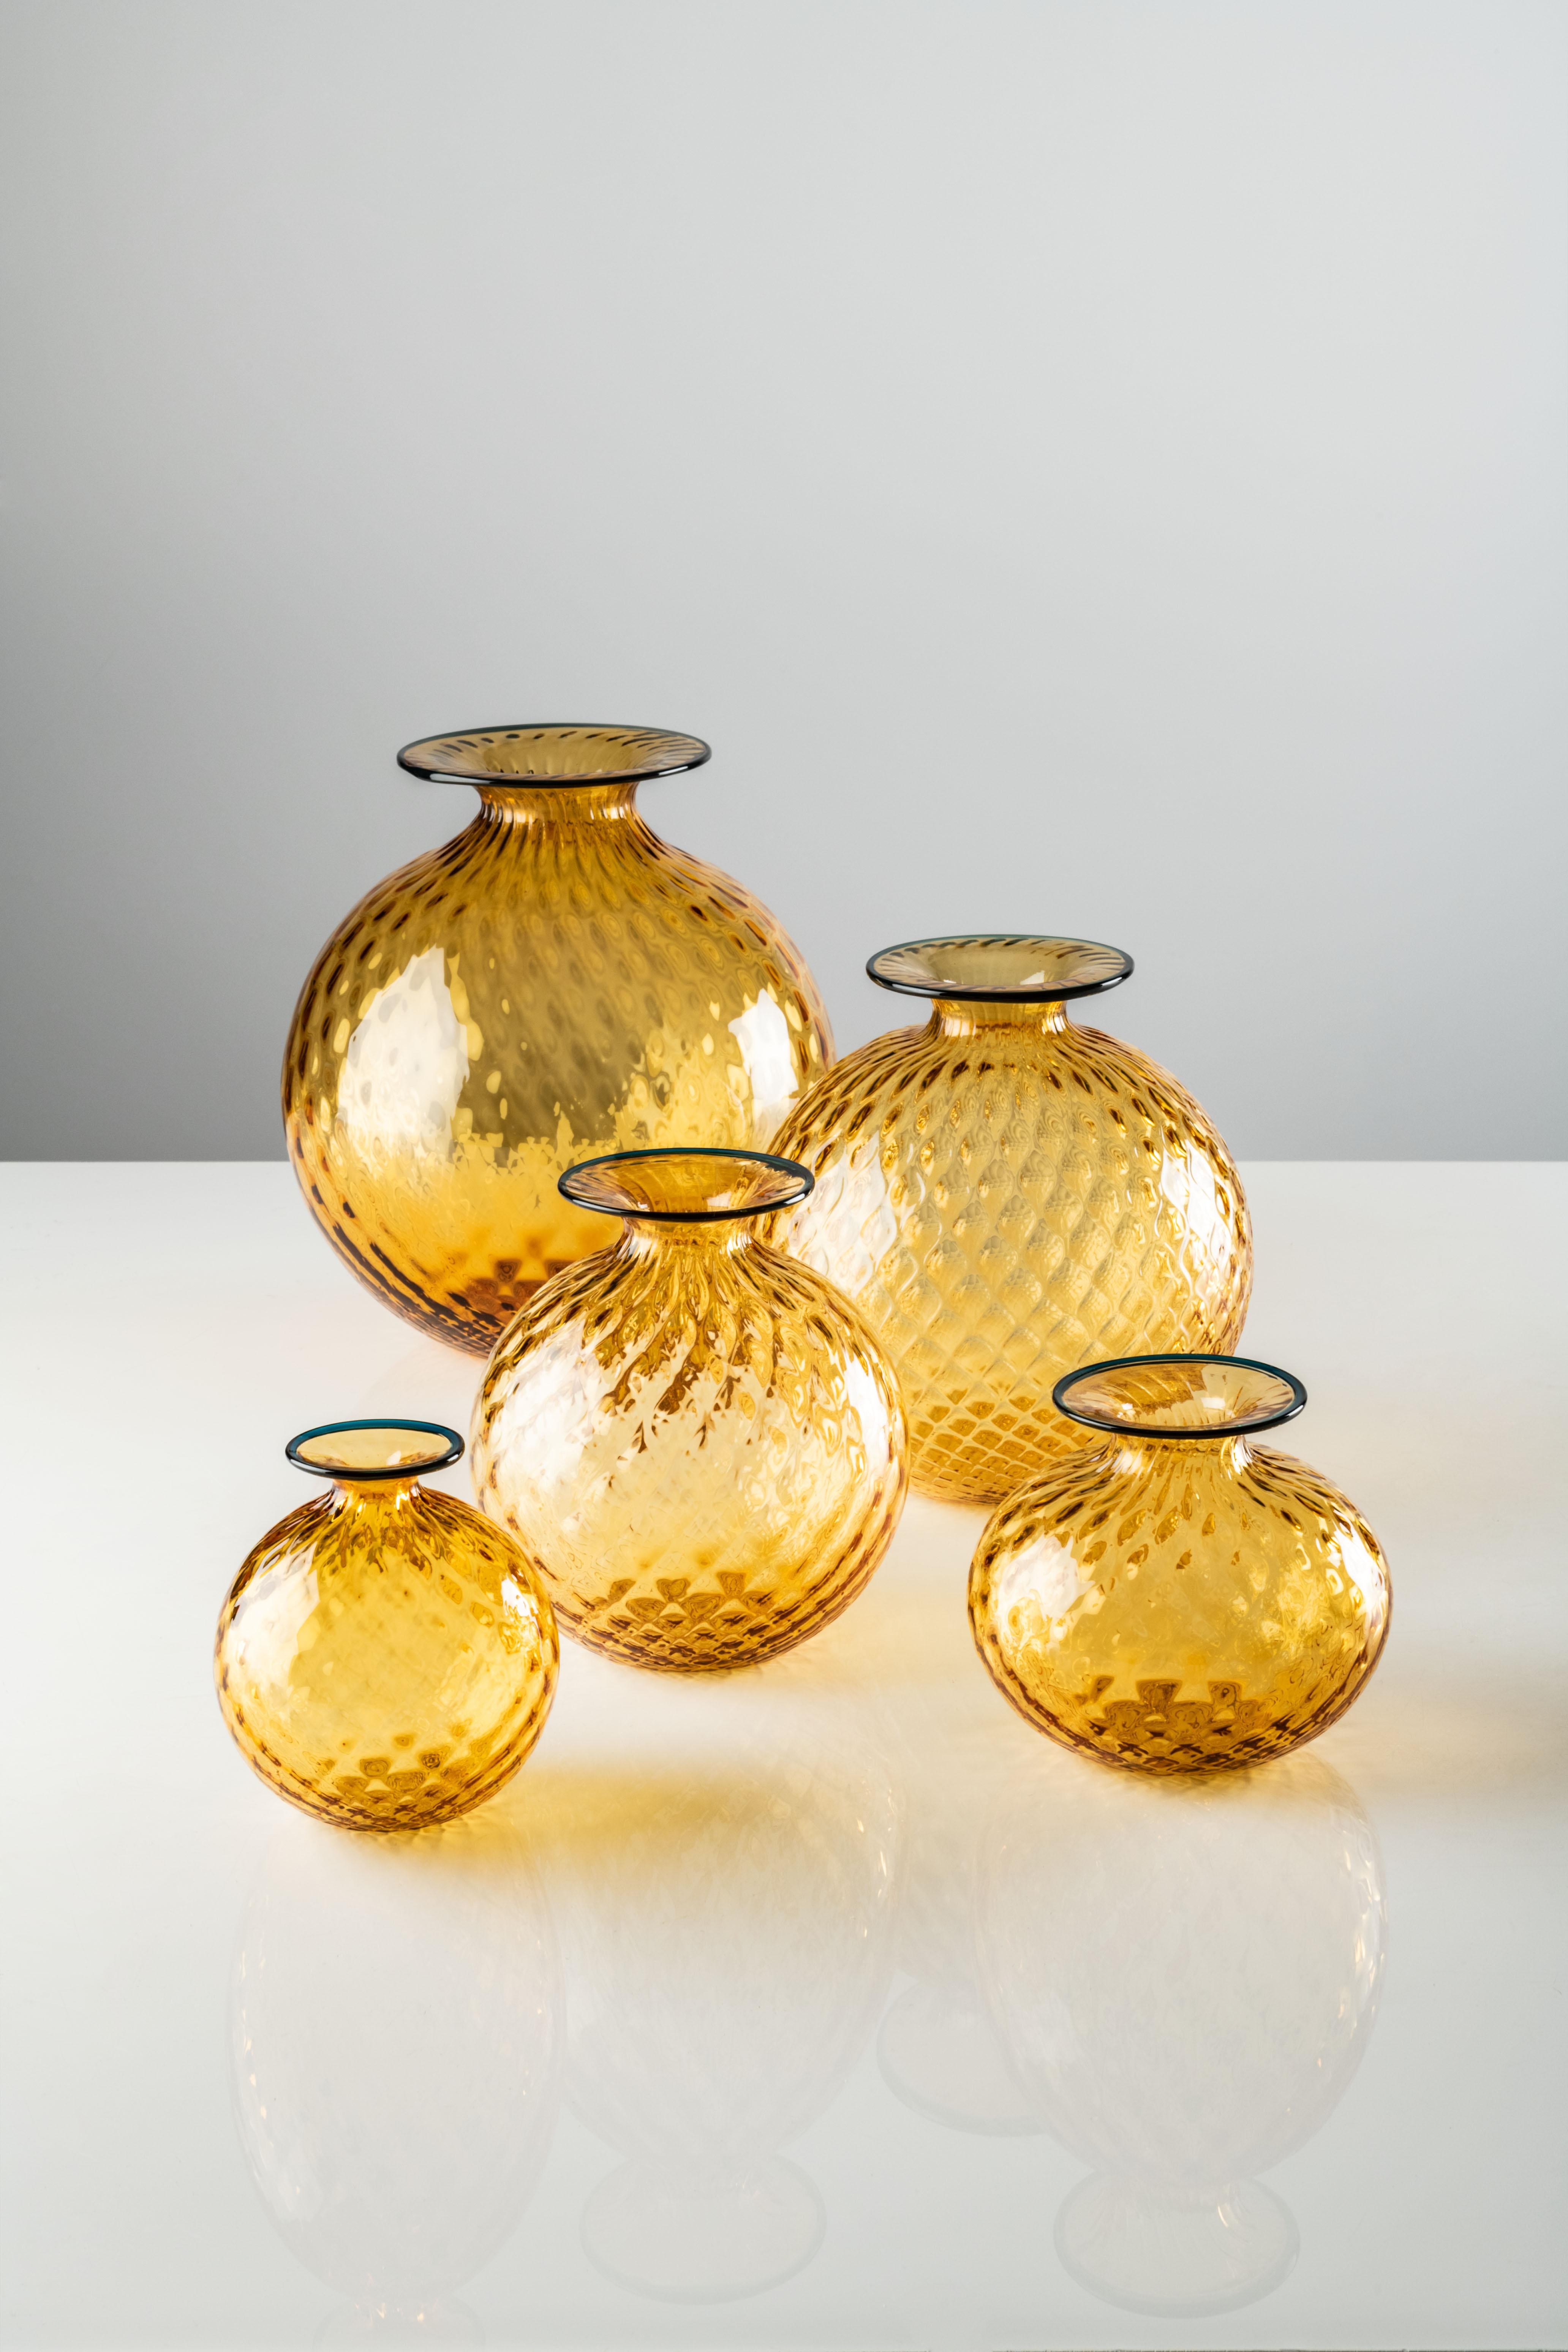 Monofiore Balloton medium vase in amber Murano glass by Venini. It looks soft, but it’s not; it’s glass. The optical illusion of Monofiori by Venini from 1970 lies in its name: Balloton, a special technique that lends a unique matelassé effect to